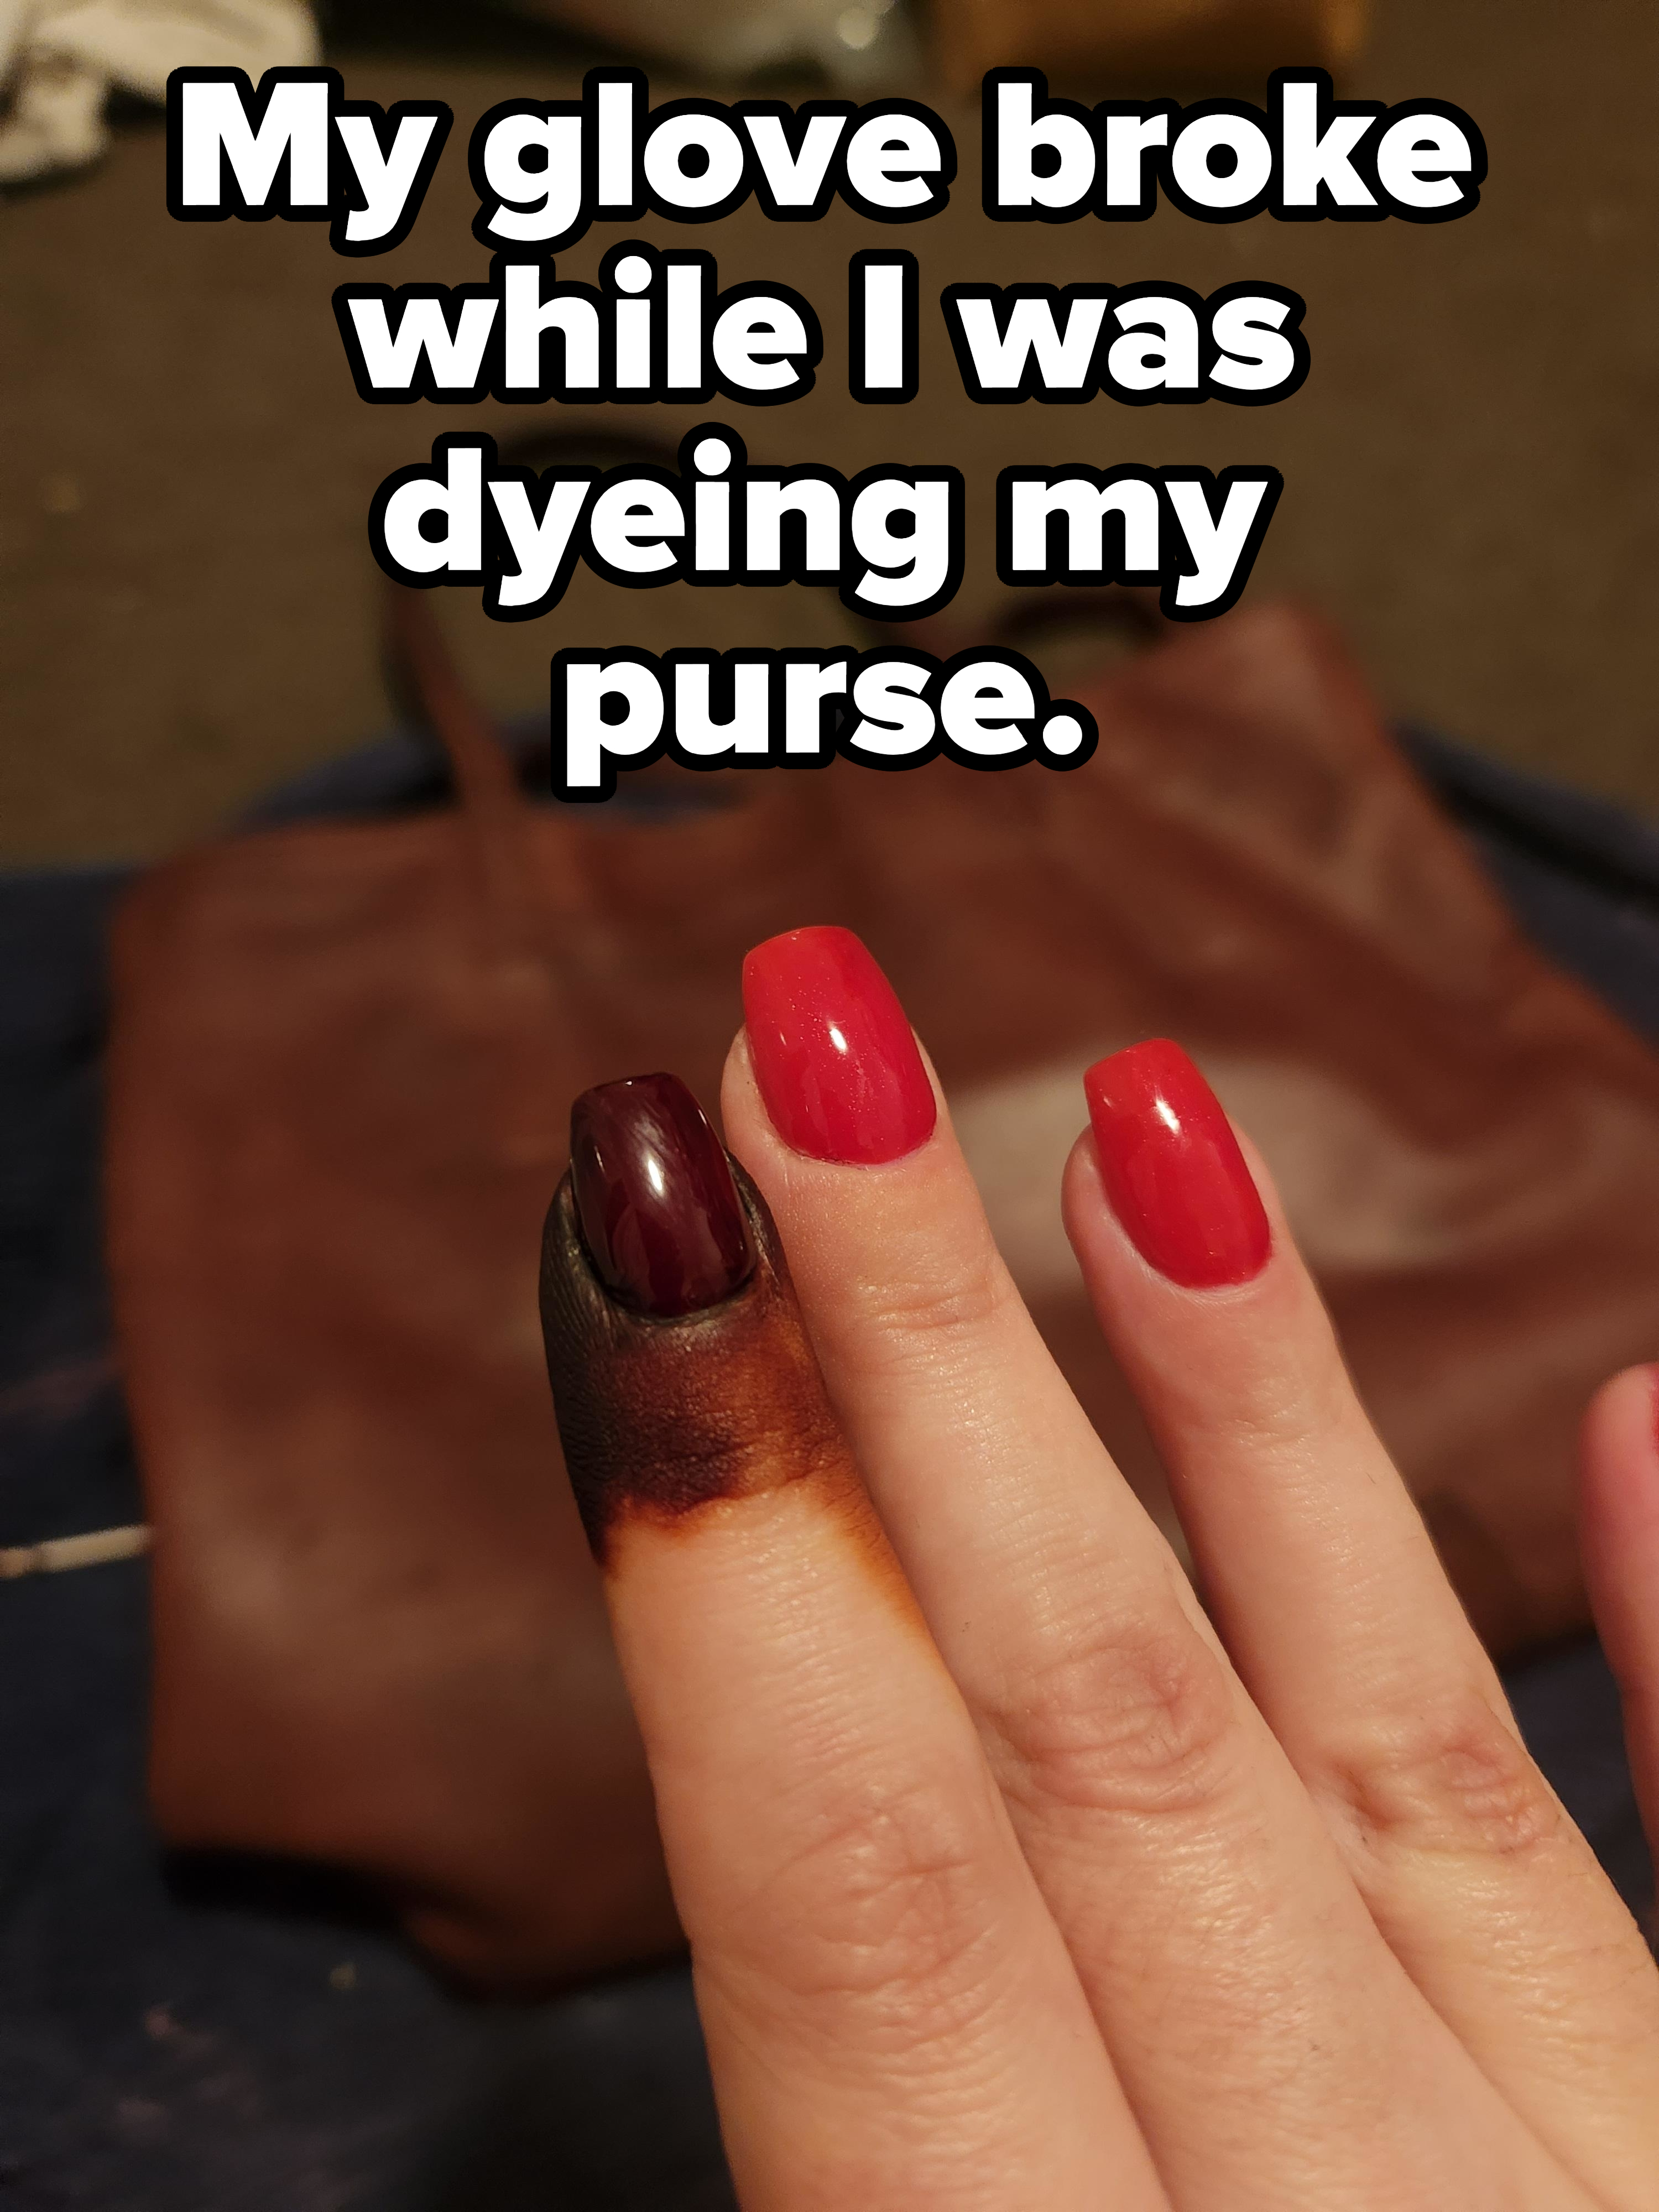 Close-up of a person&#x27;s fingers, one of which is stained dark, with caption &quot;My glove broke while I was dyeing my purse&quot;